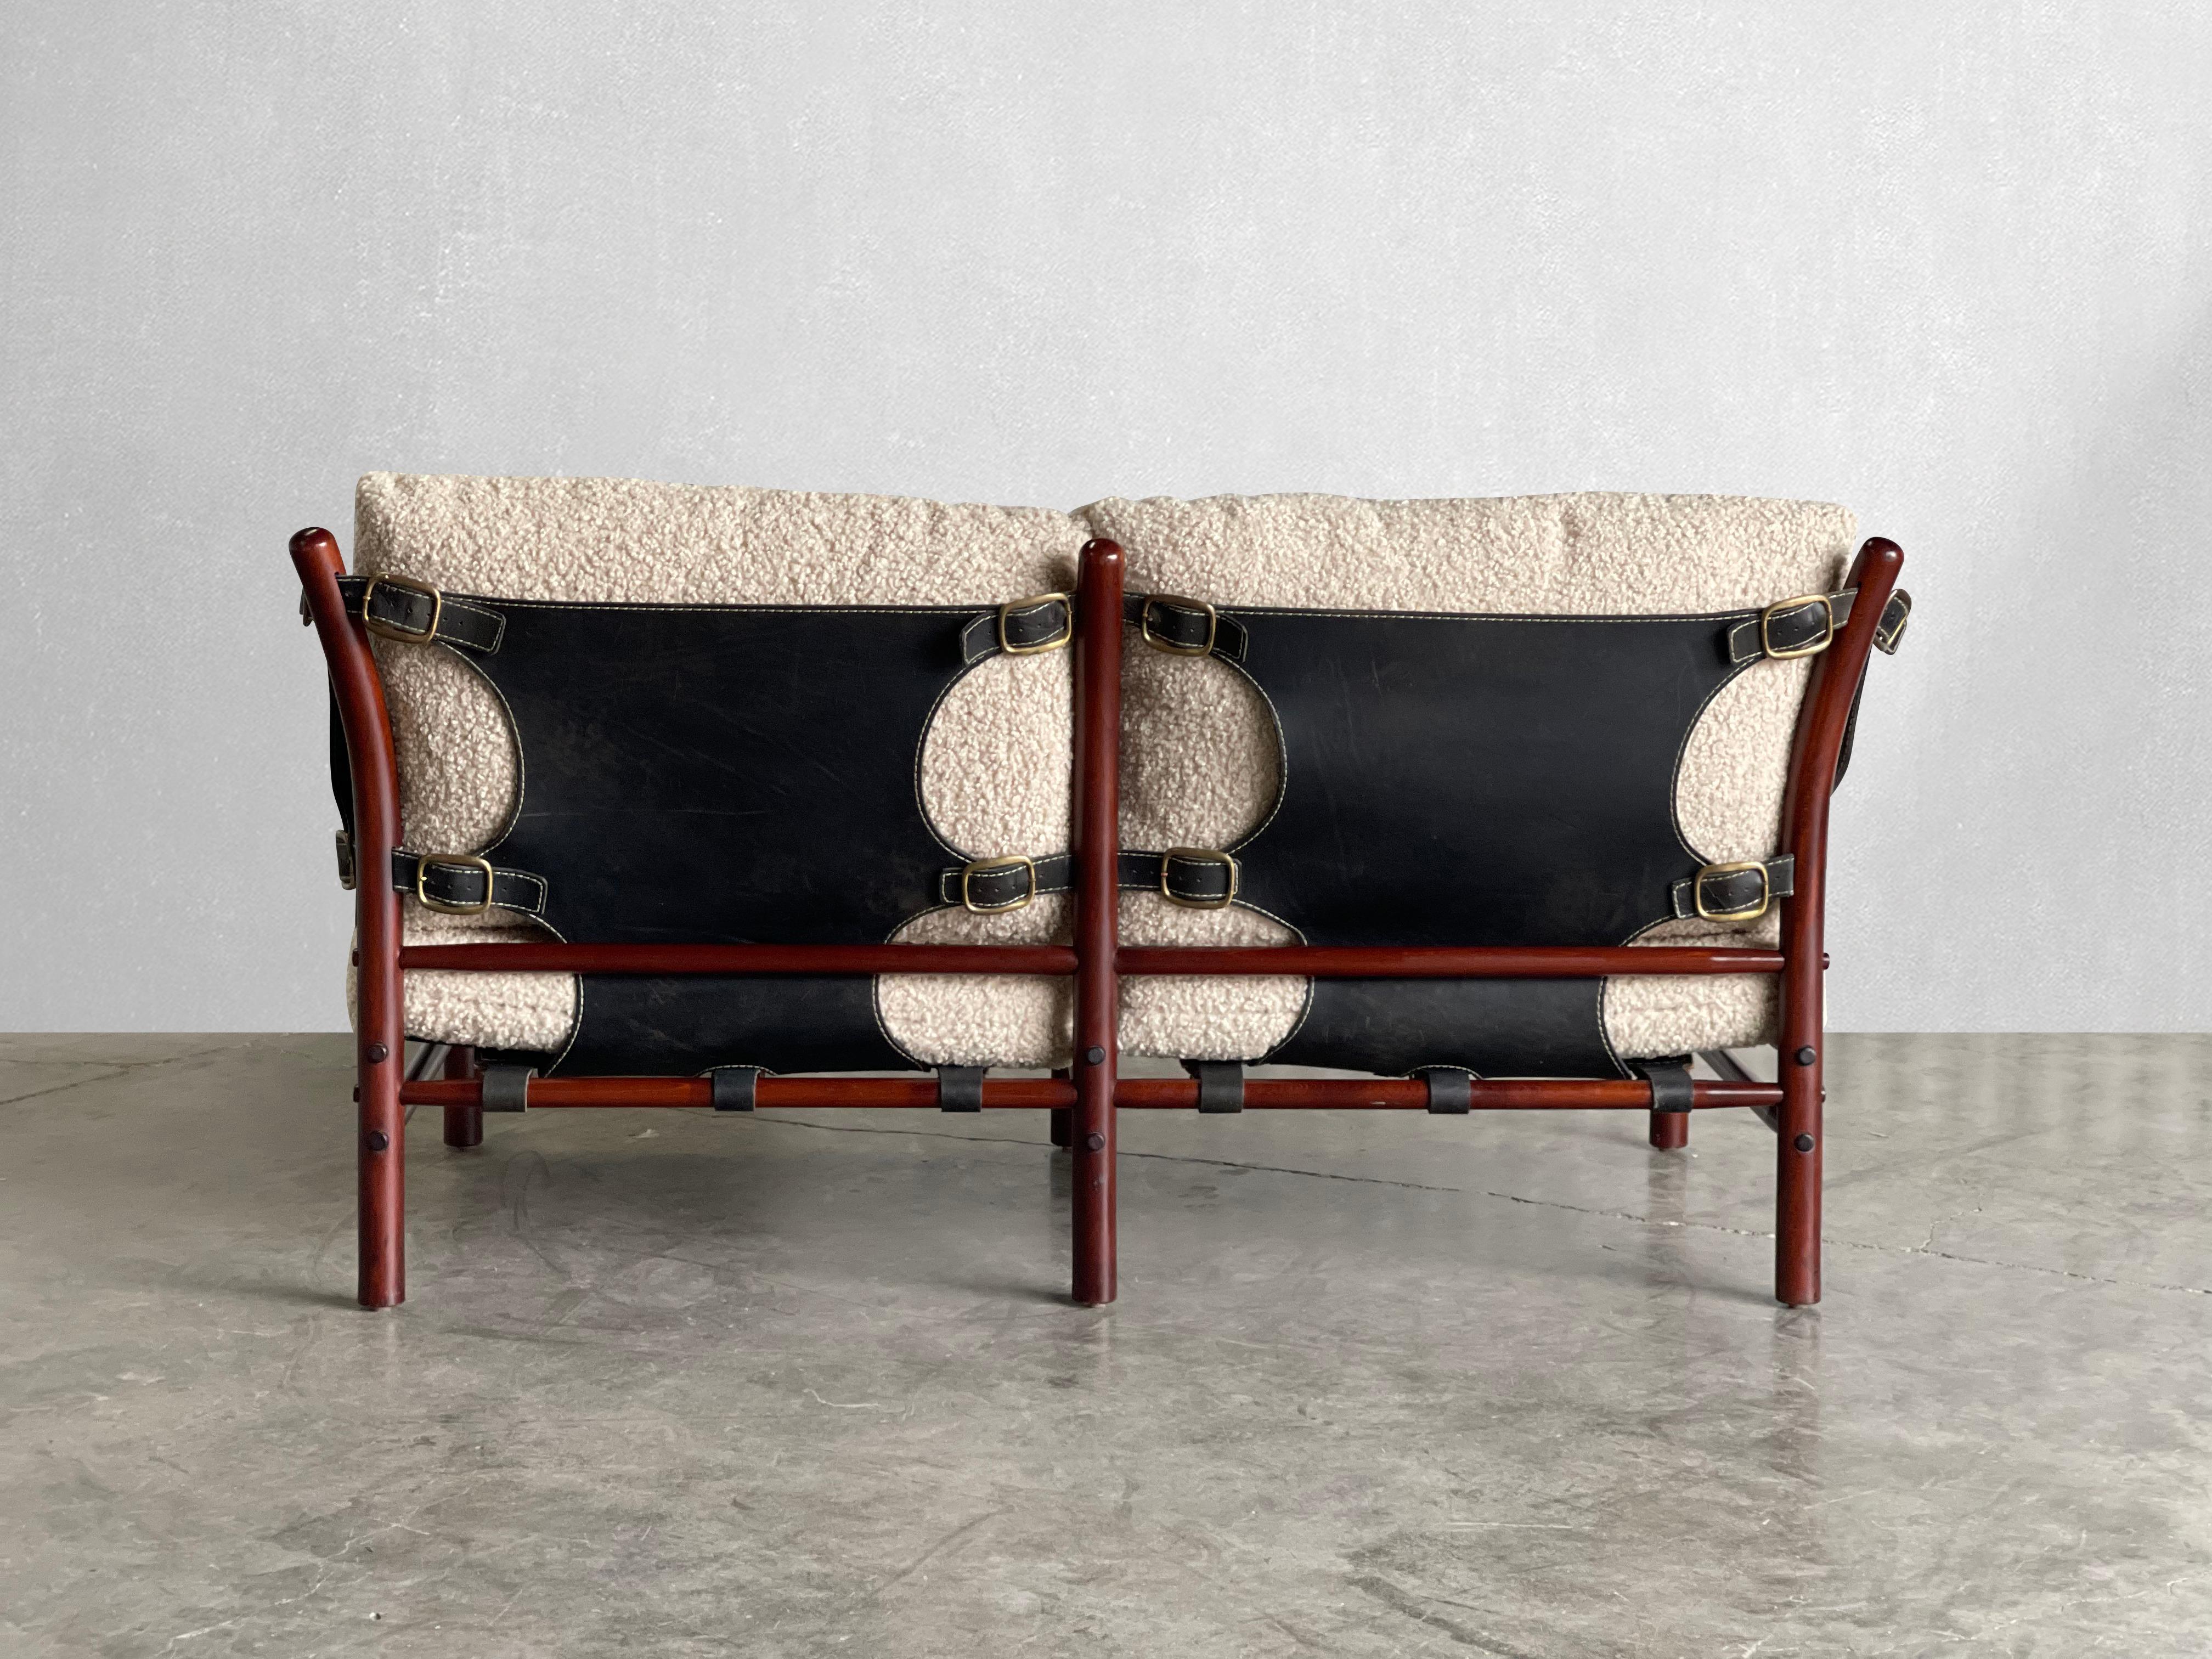 C. 1960s

Produced by Arne Norell AB in Sweden. This sofa is epitome of comfort. It has been reupholstered in the highest quality stone colored vegan sherpa. The frame is comprised of stained bentwood, leather and brass. 

Arne Norell's enduring